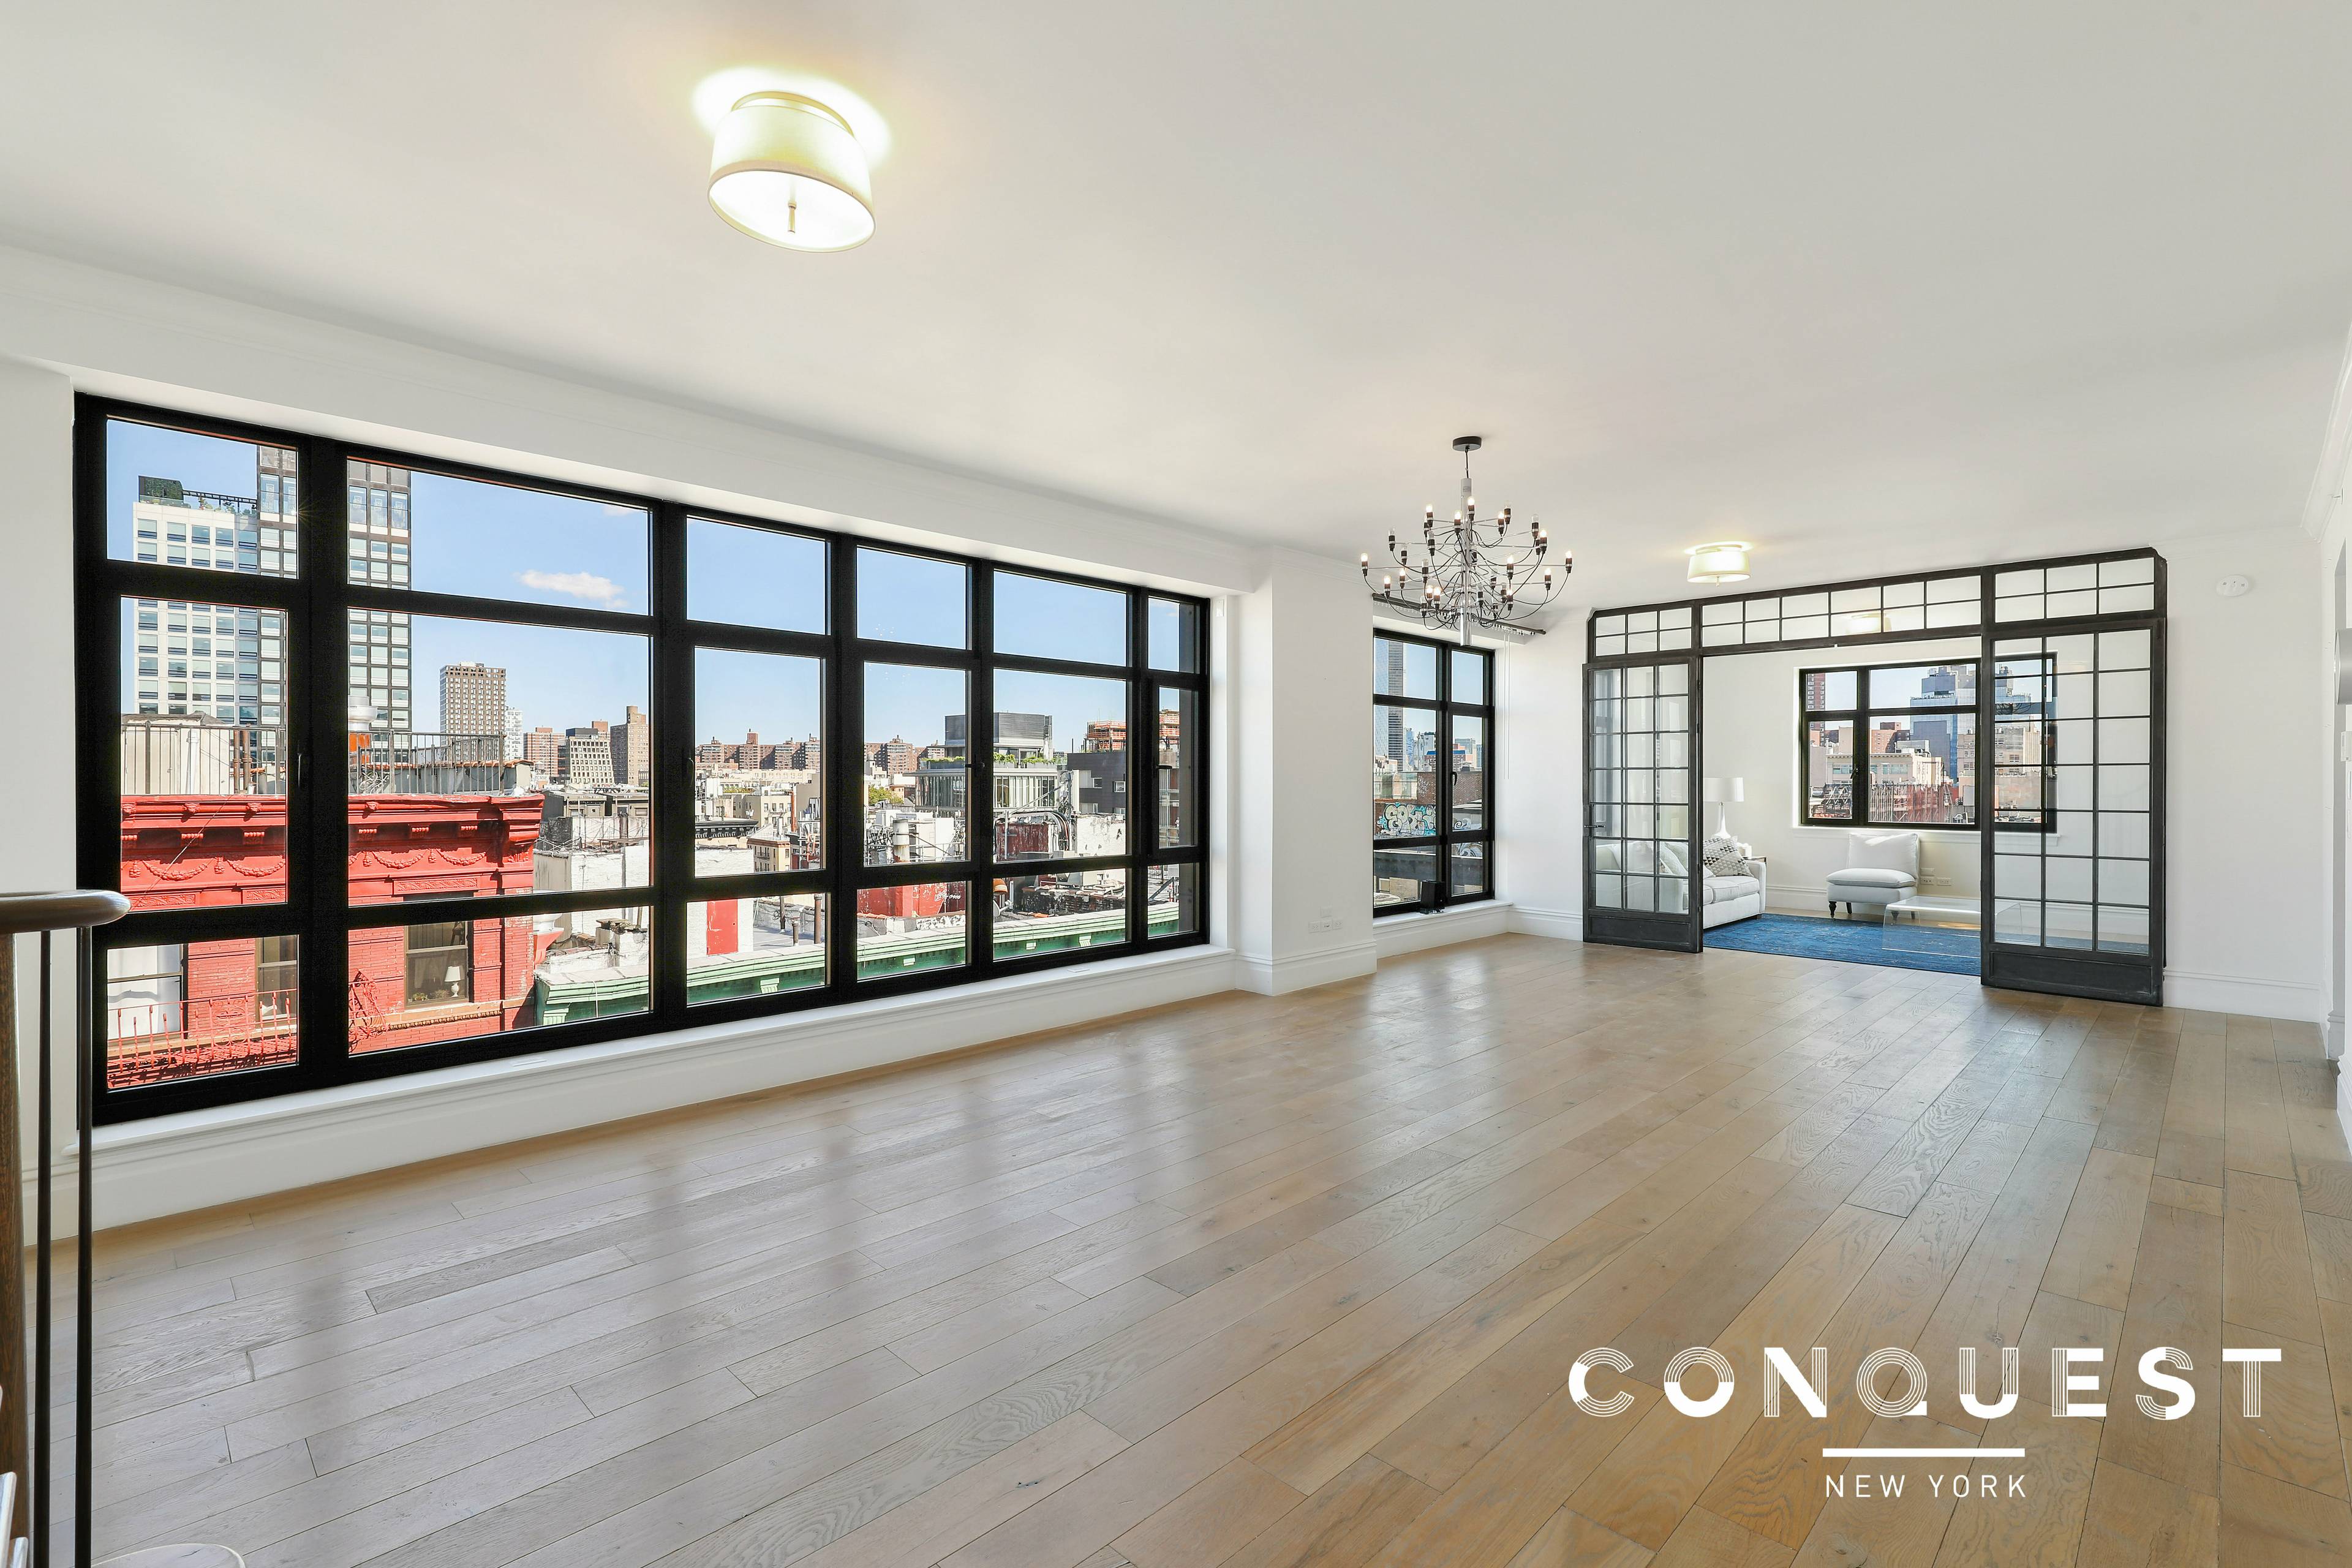 The Penthouse at 199 Mott is a luxurious full floor 3 bedroom, 3 bathroom apartment with 4 exposures and views stretching from the Empire State Building to the Freedom Tower ...